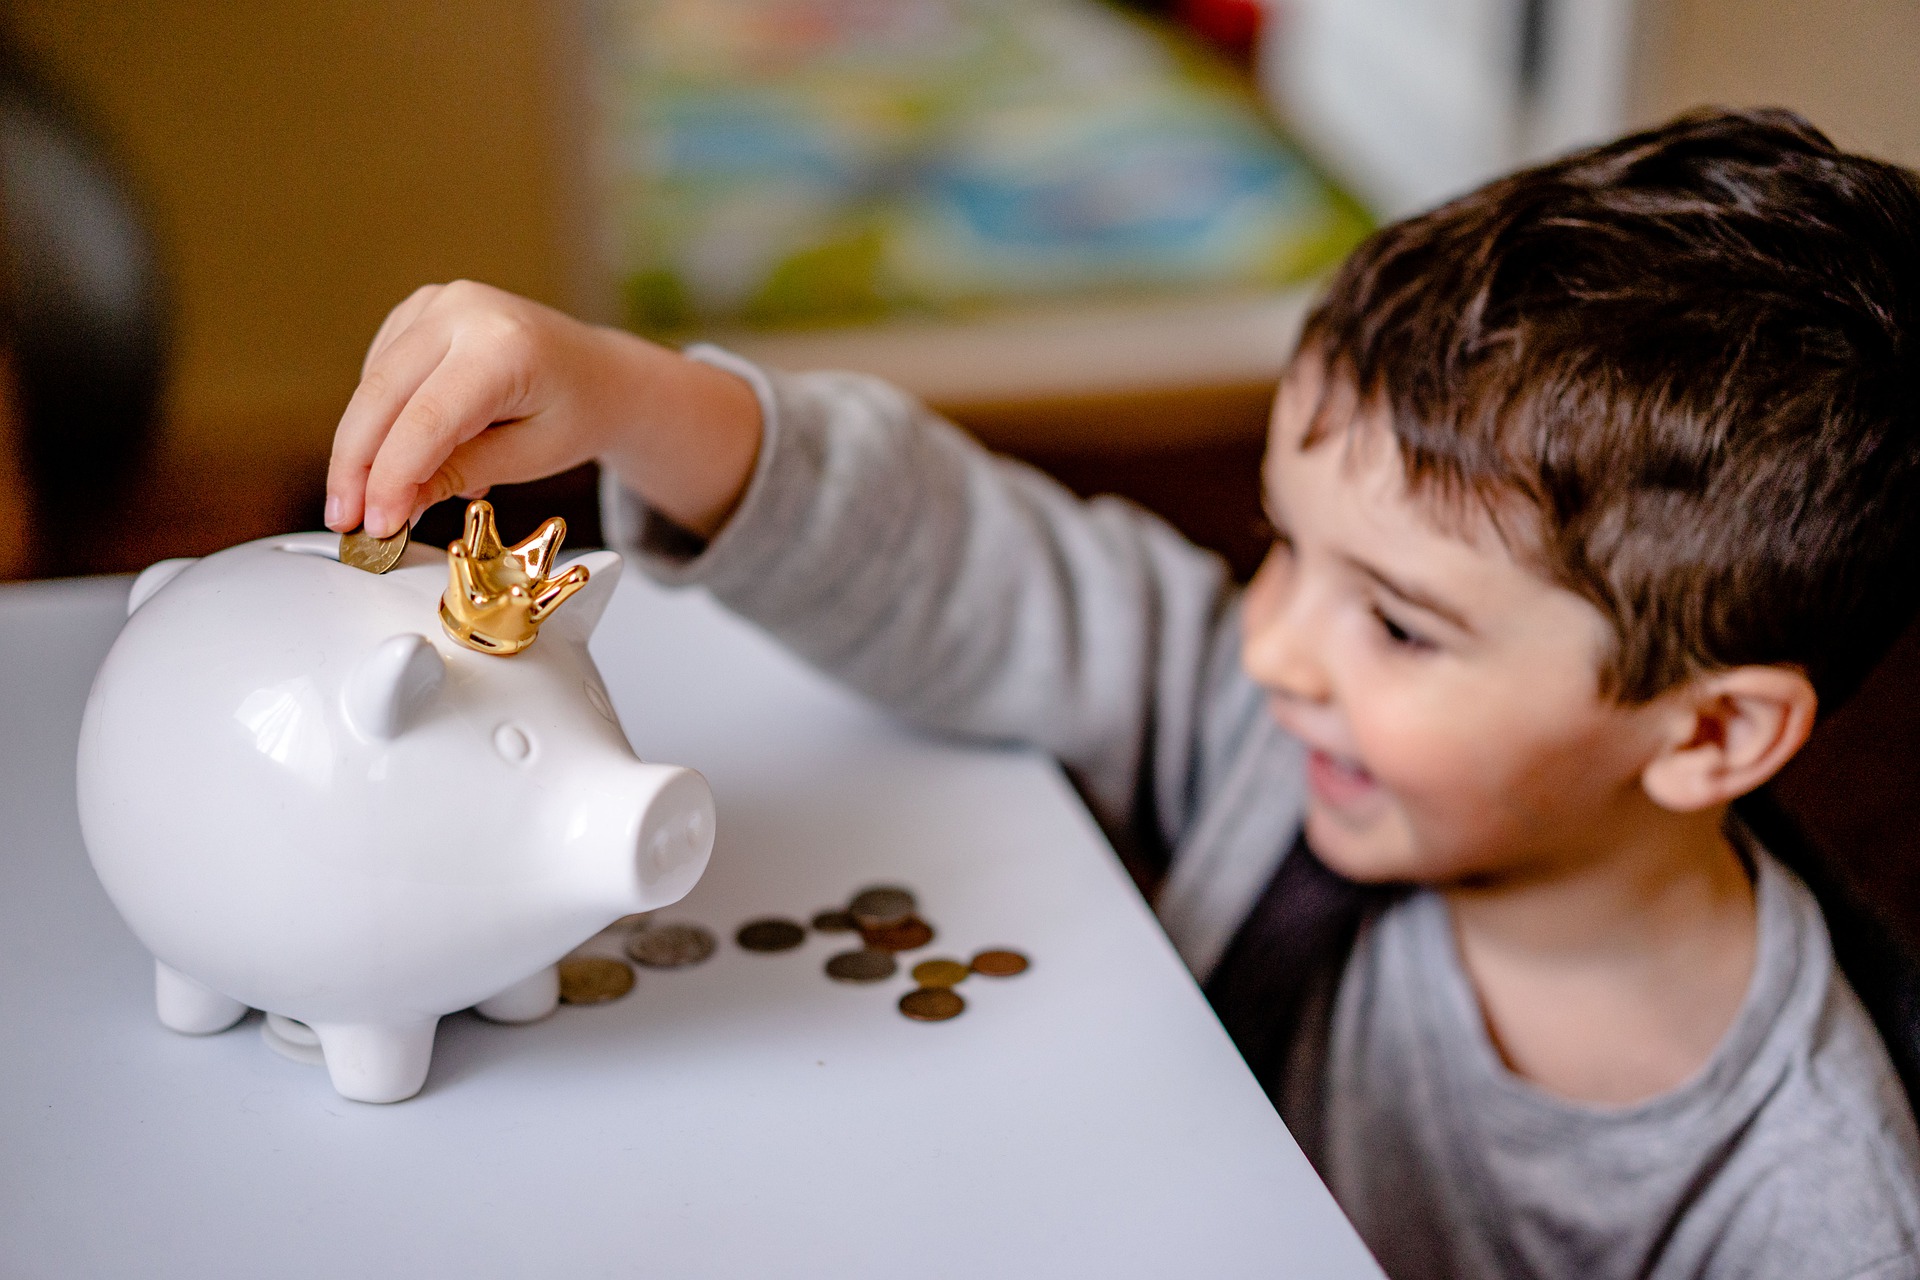 Child putting coins in a piggy bank